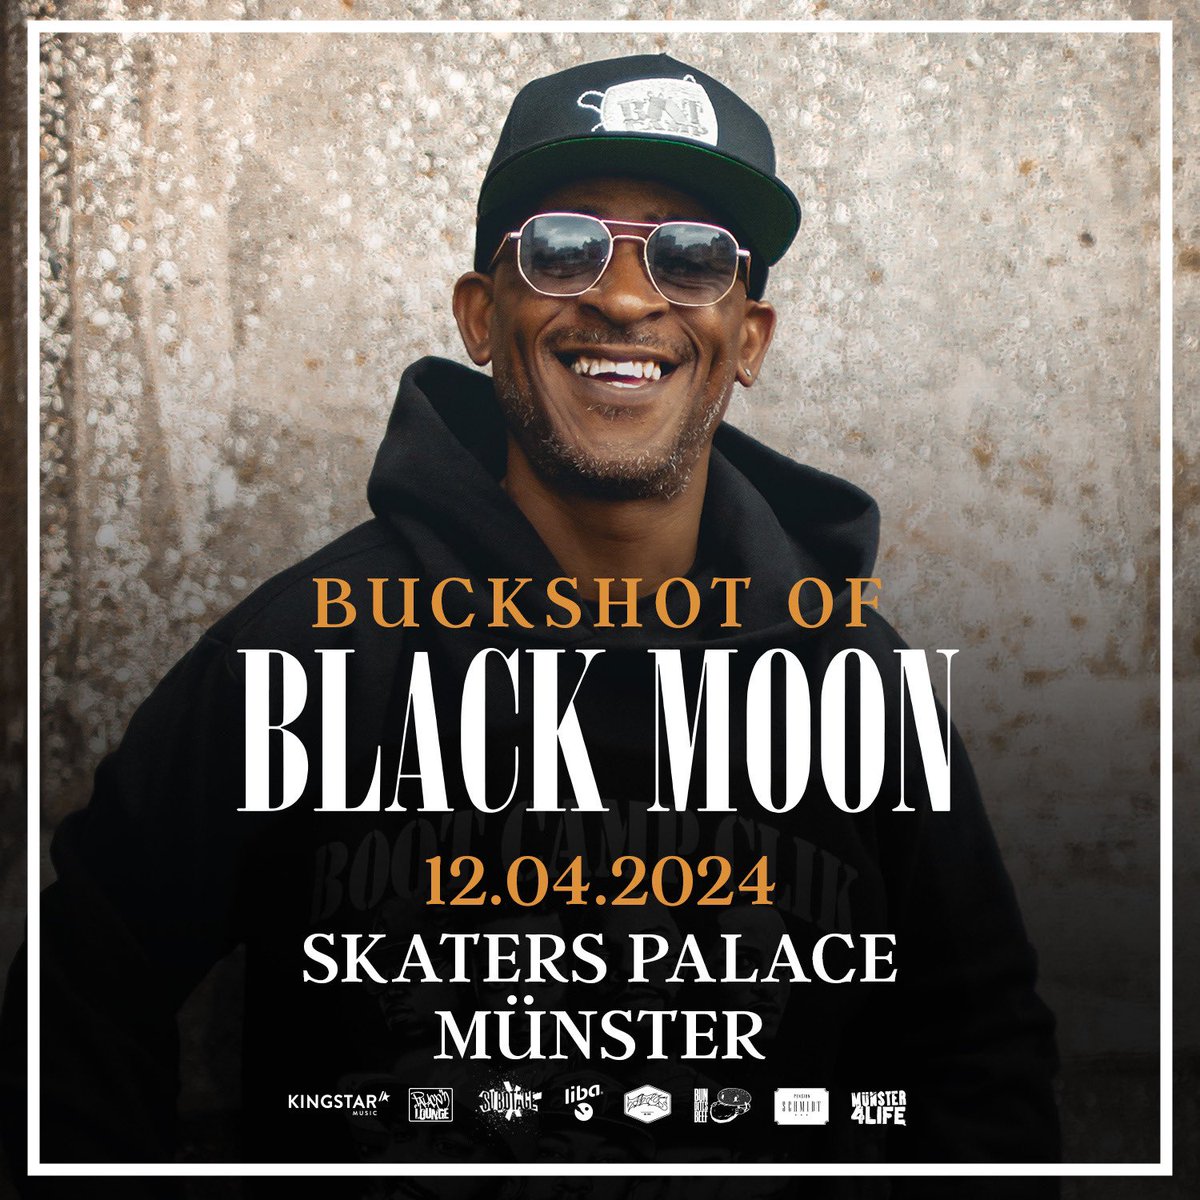 🎤 Tomorrow night @Buckshot will be live at Skaters Palace in Münster, Germany - get tickets now at the link below-> bit.ly/3T34czr